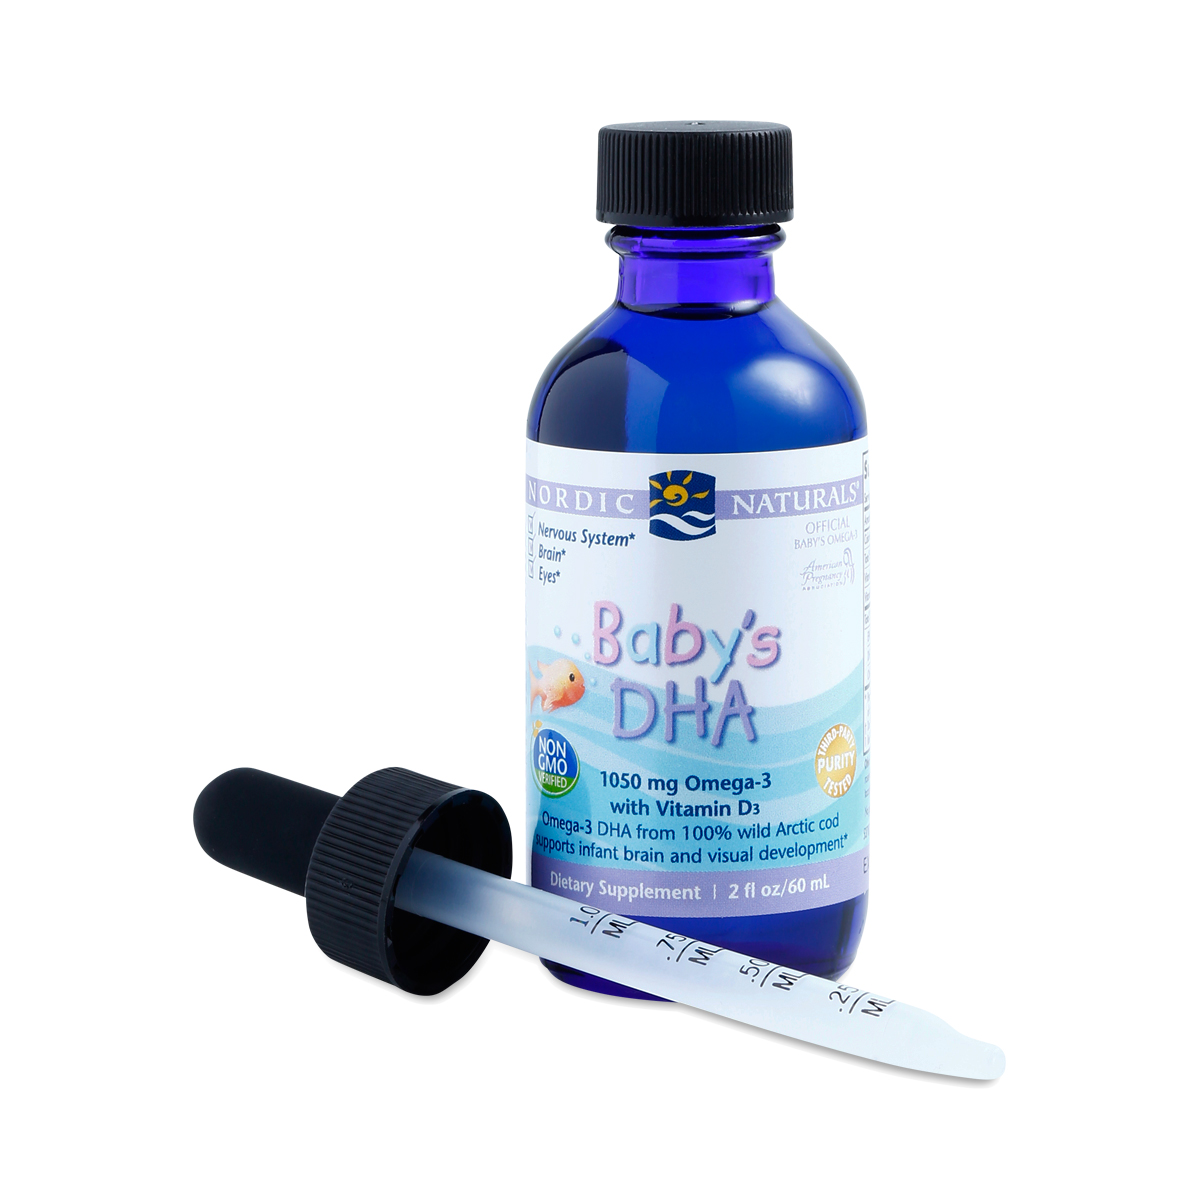 Nordic Naturals Baby’s DHA, Unflavored 2 oz bottle